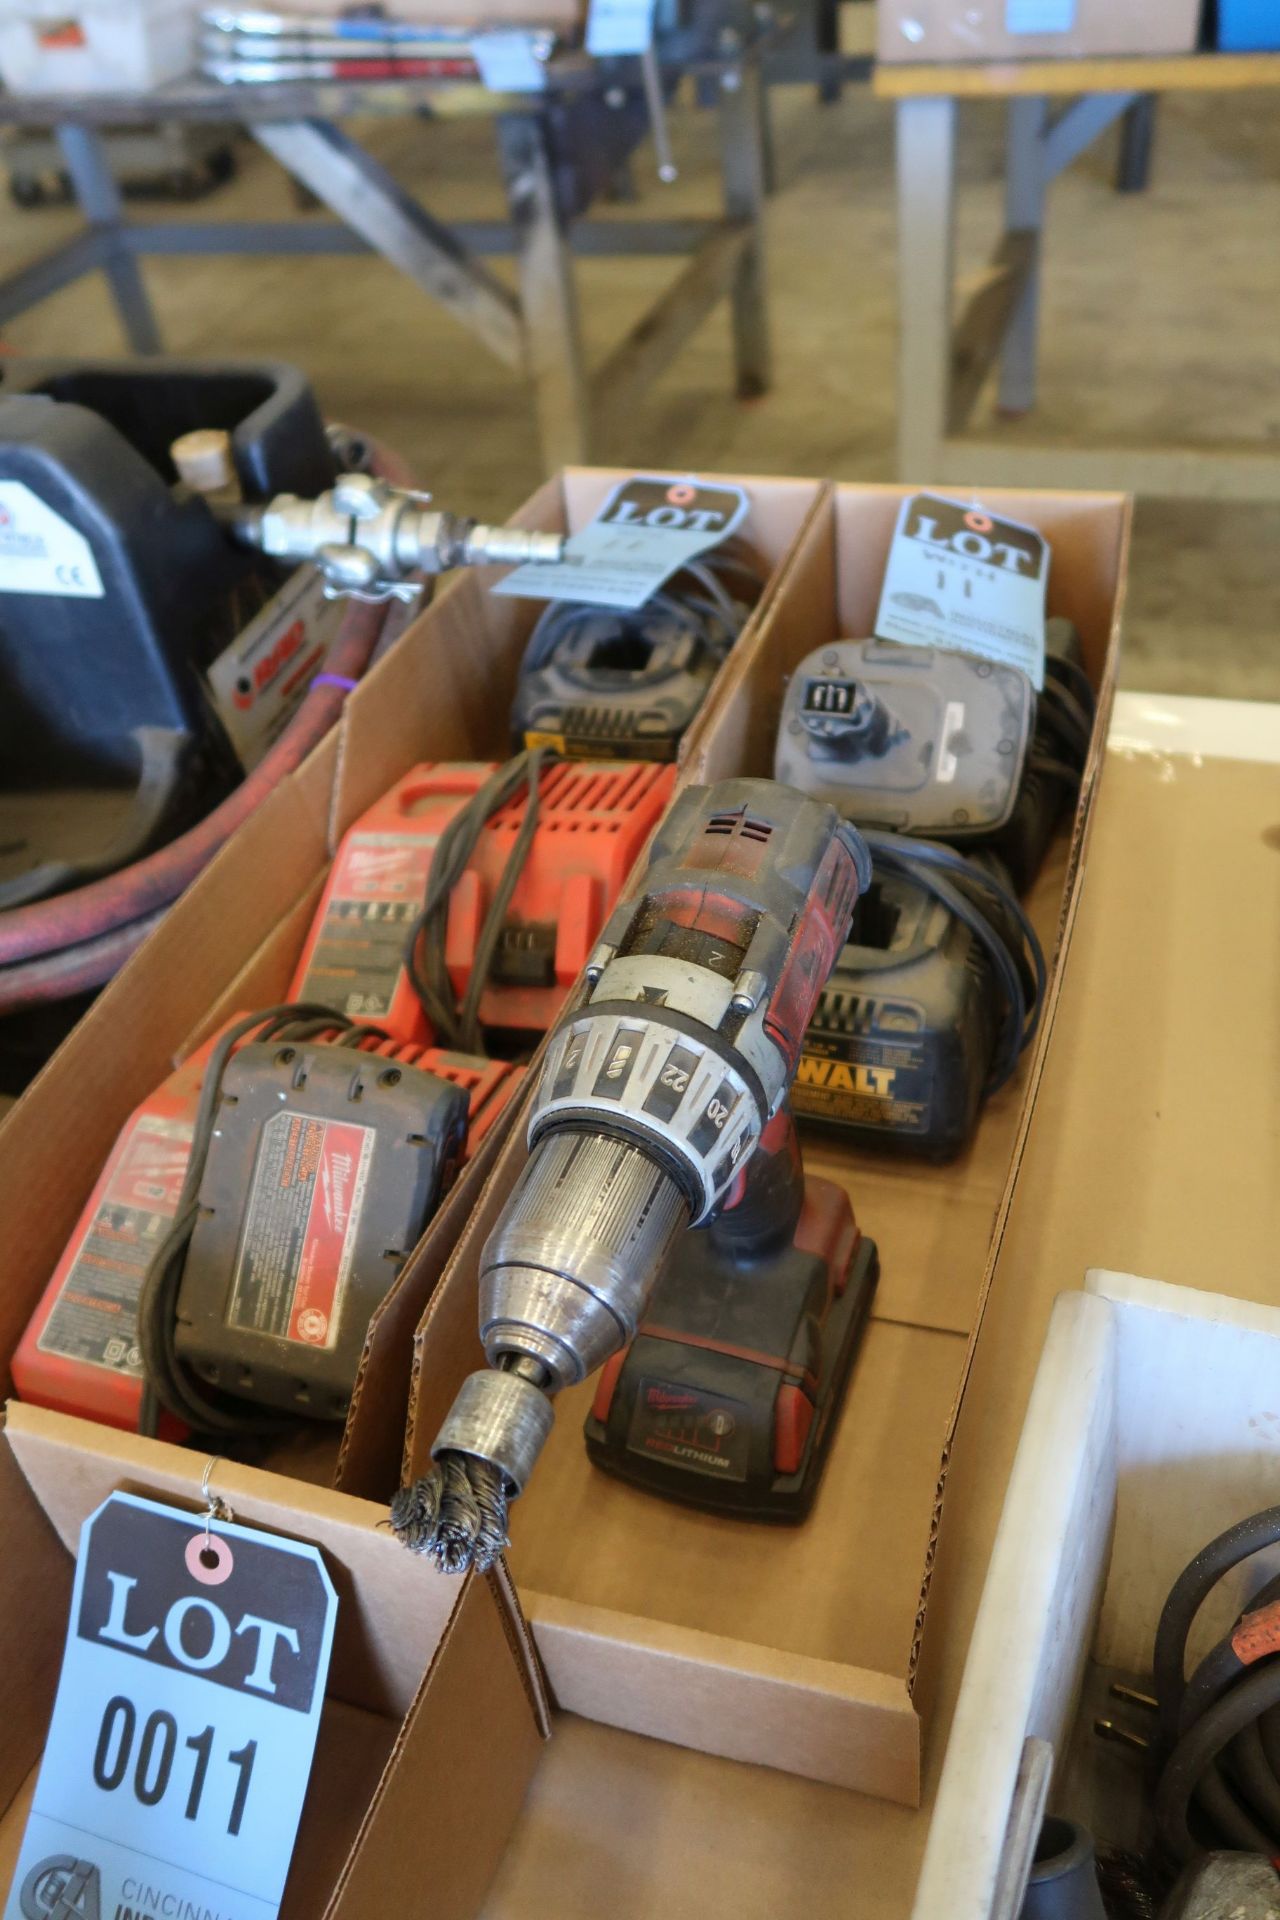 (LOT) DEWALT AND MILWAUKEE CORDLESS DRILLS WITH CHARGERS - Image 2 of 2